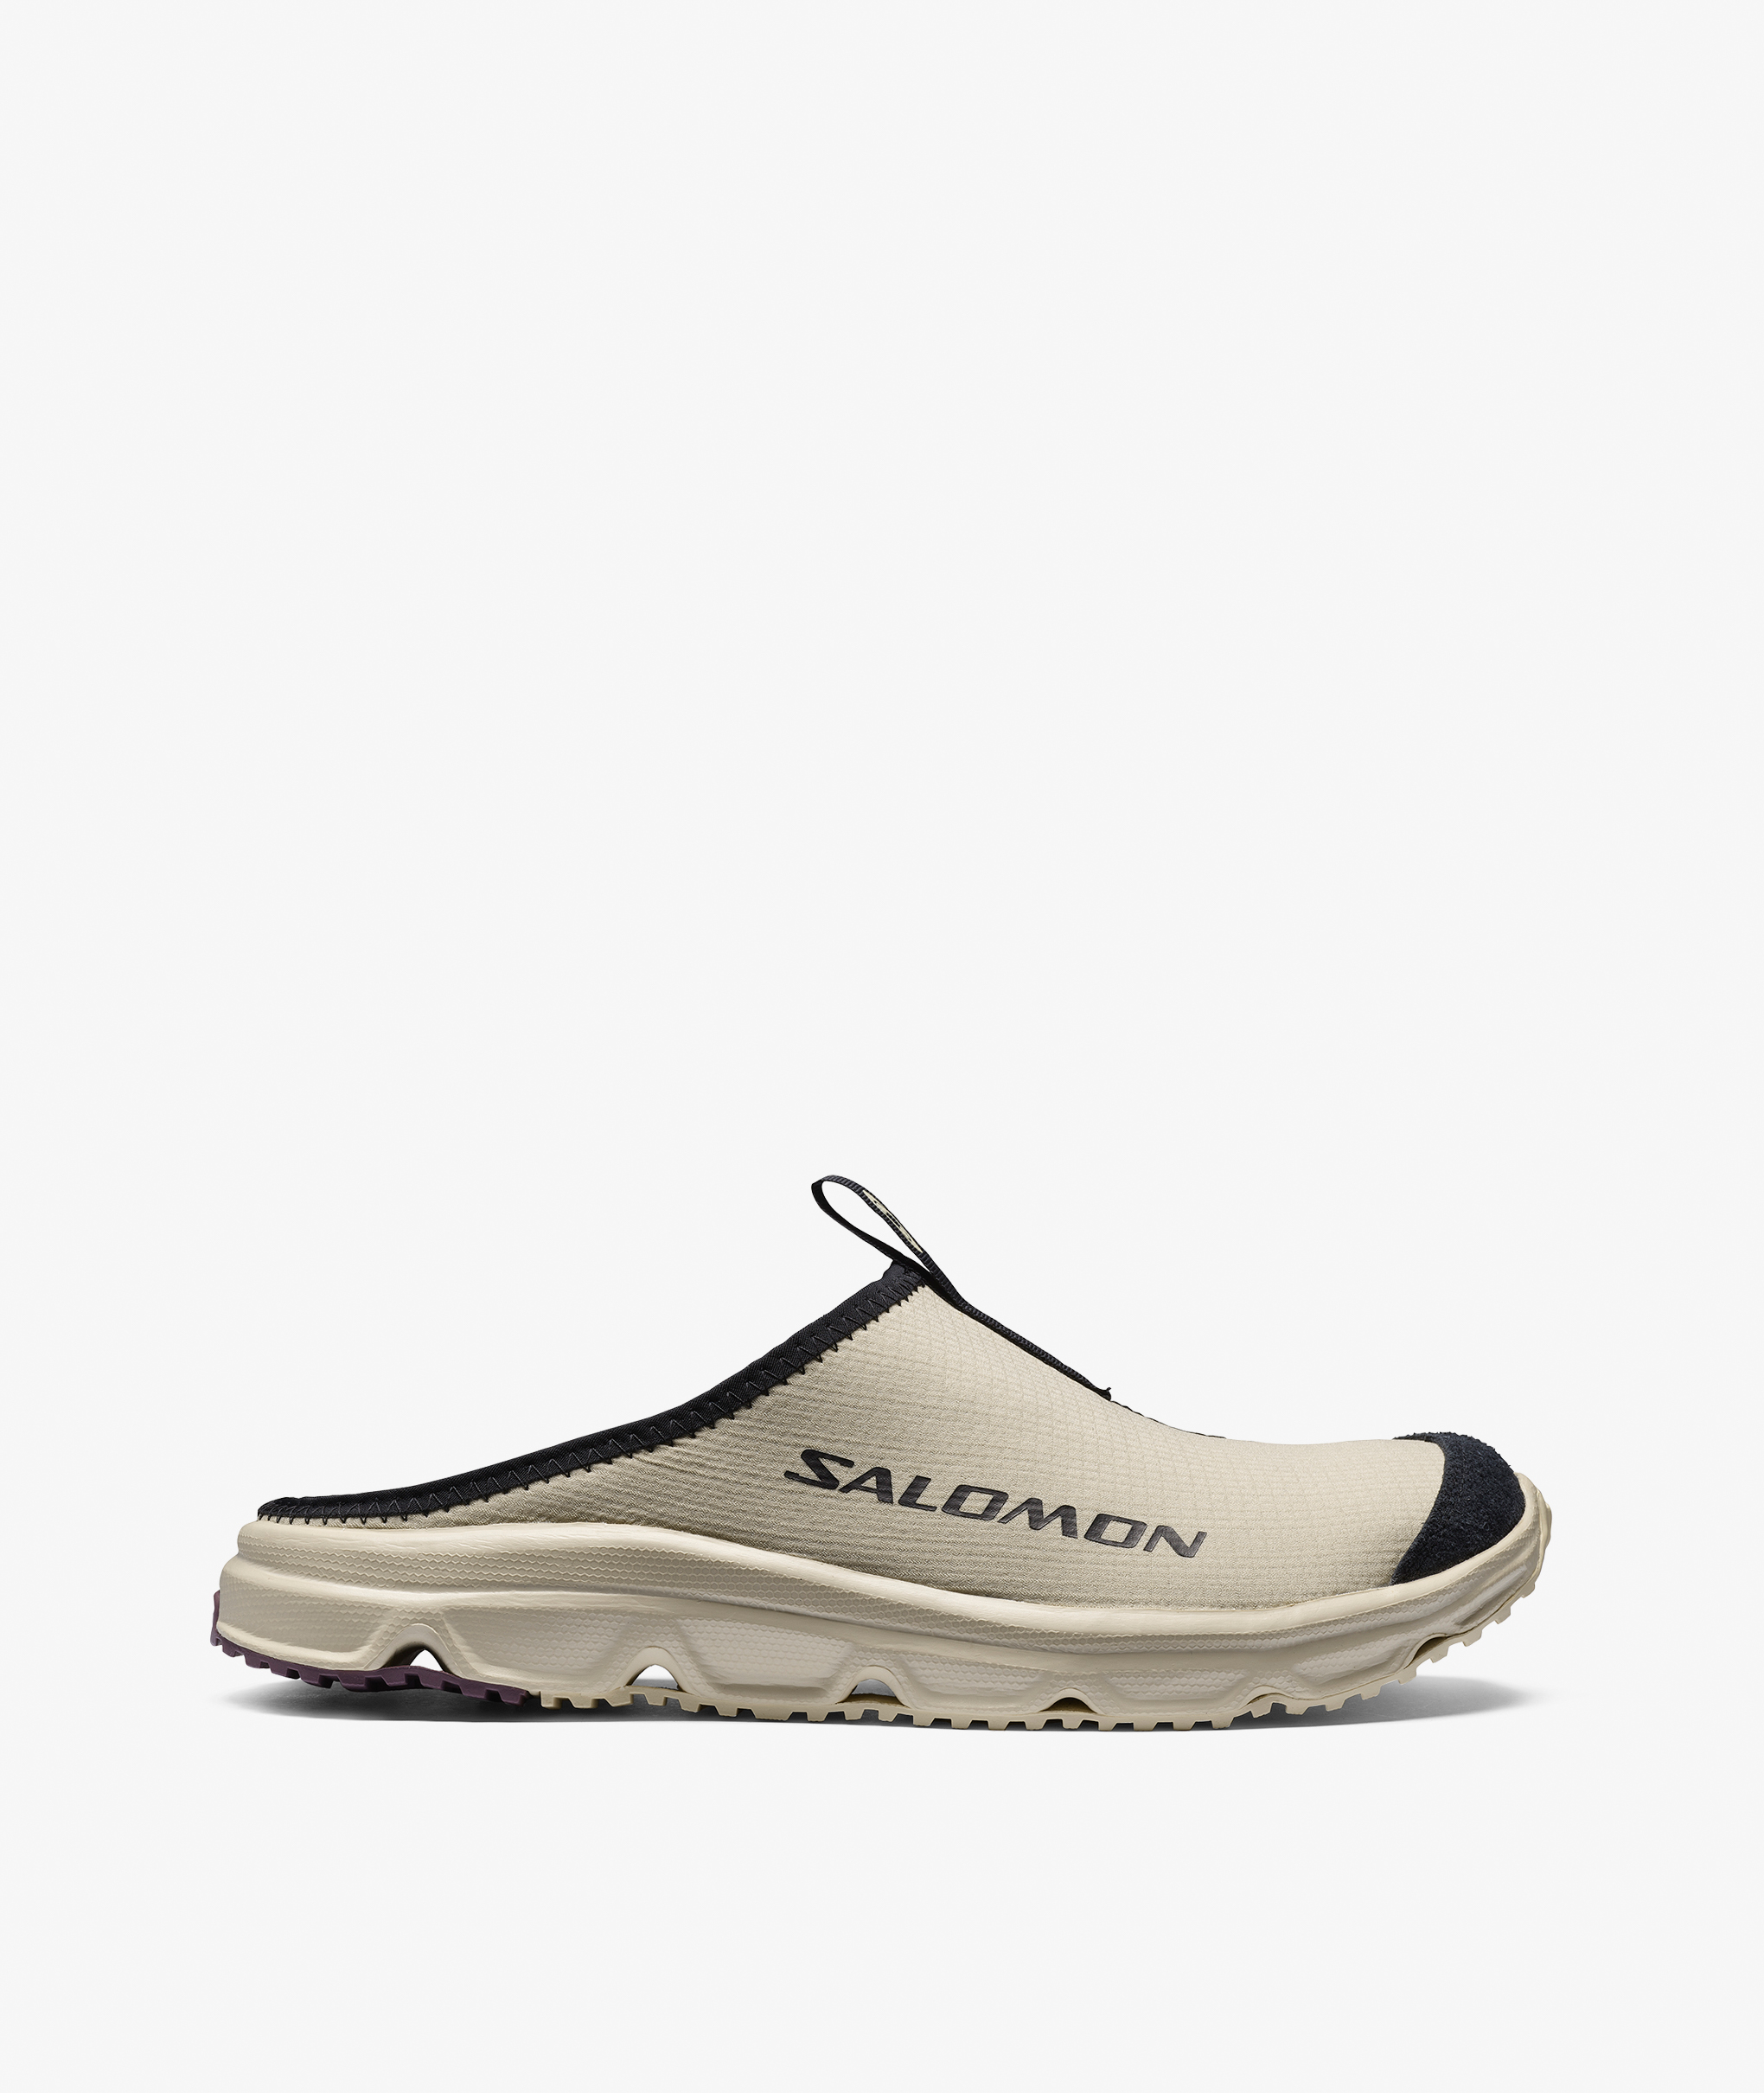 Dingy Conceited Loose Norse Store | Shipping Worldwide - Salomon RX Slide 3.0